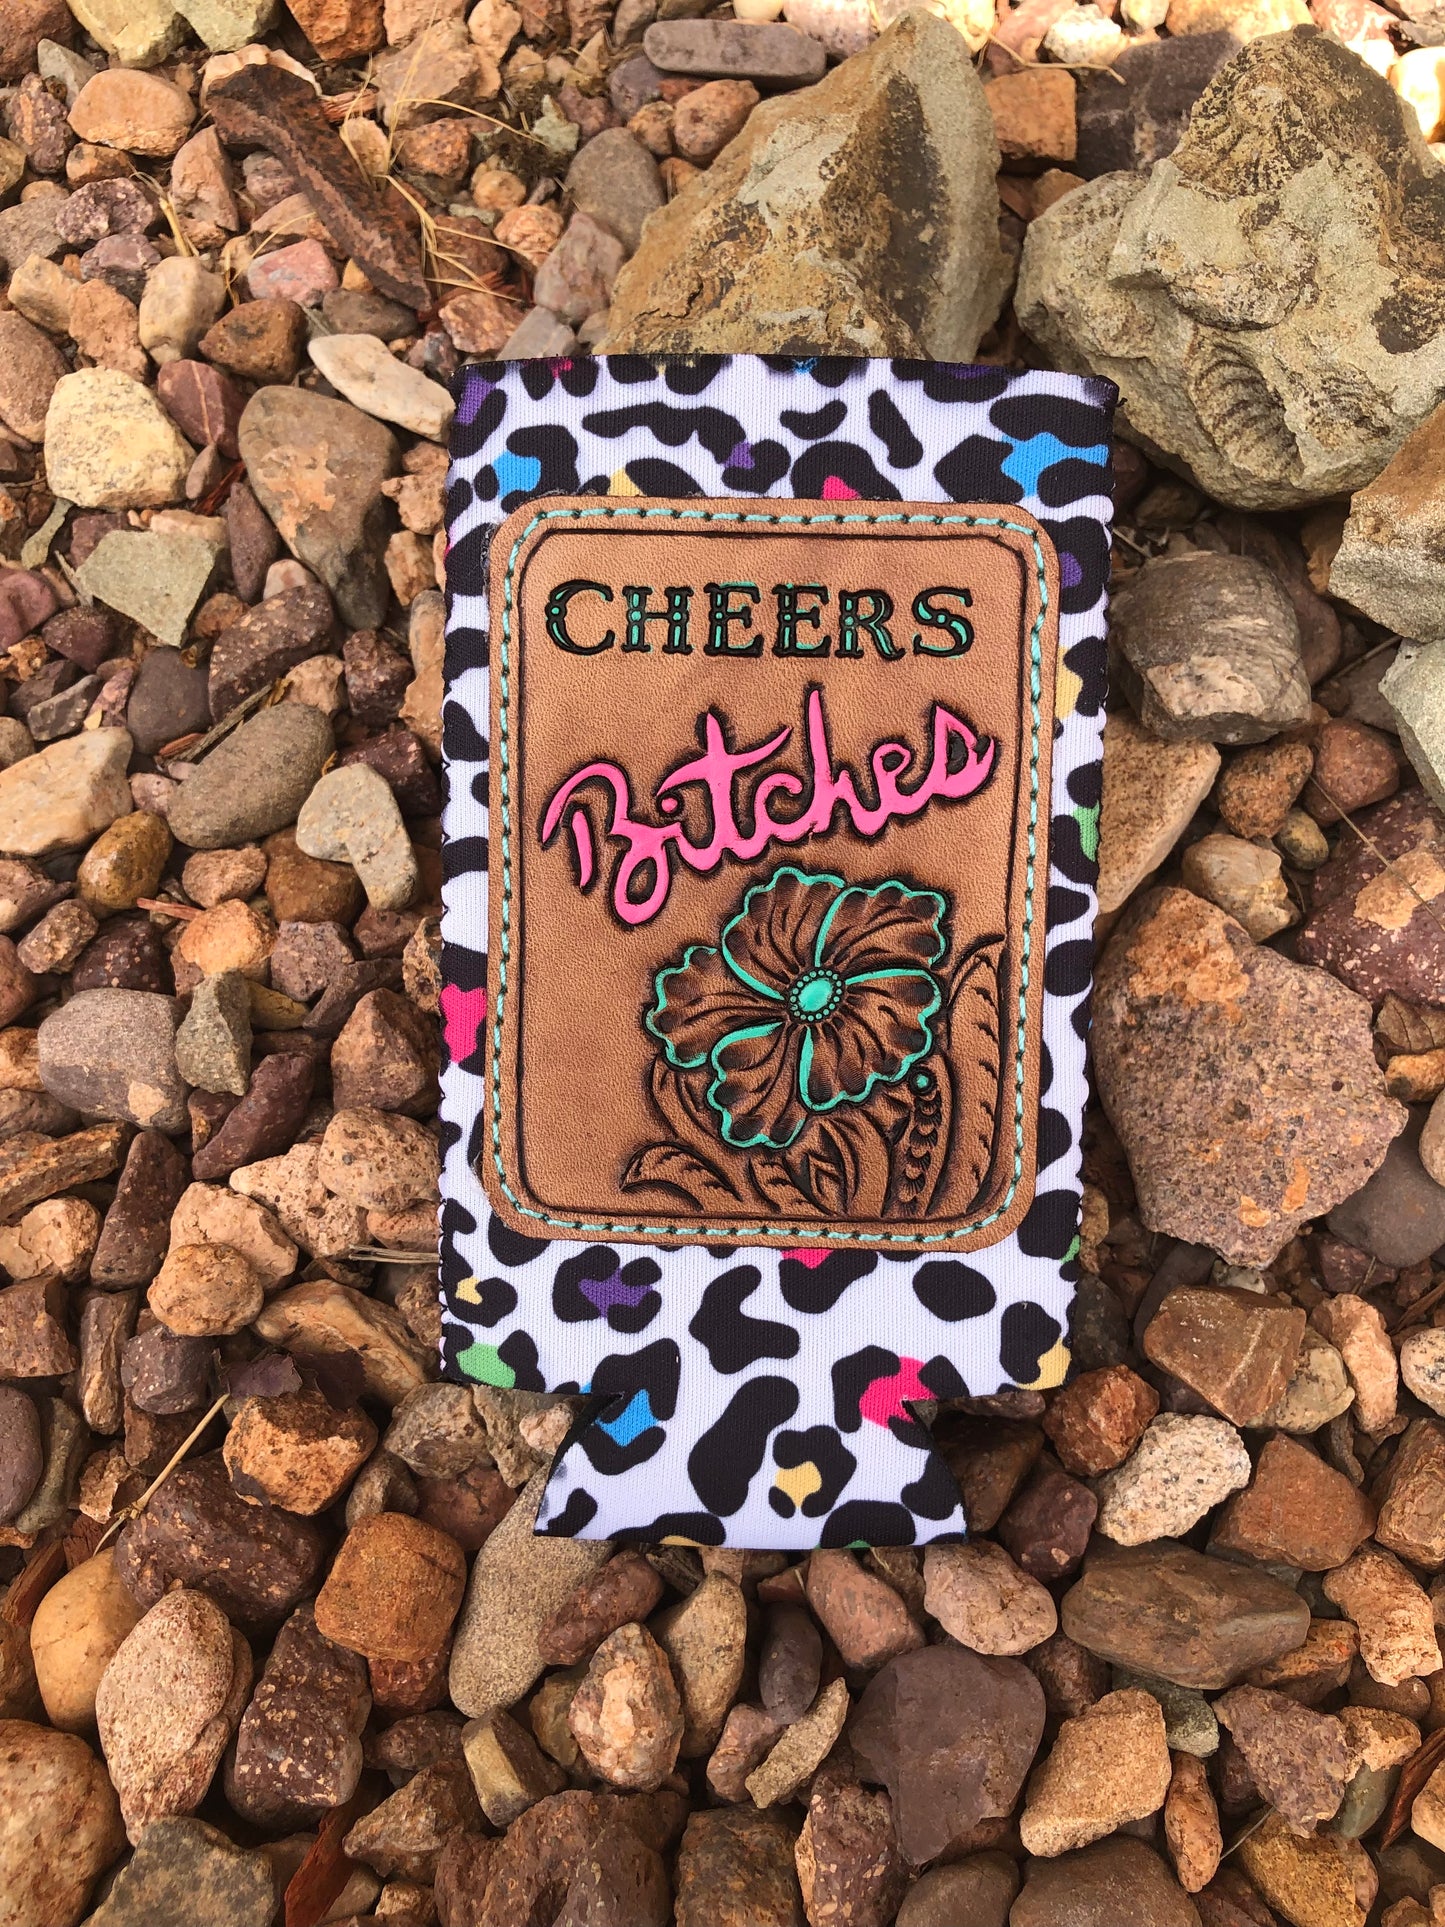 Western tooled leather cheers bitches slim can koozie